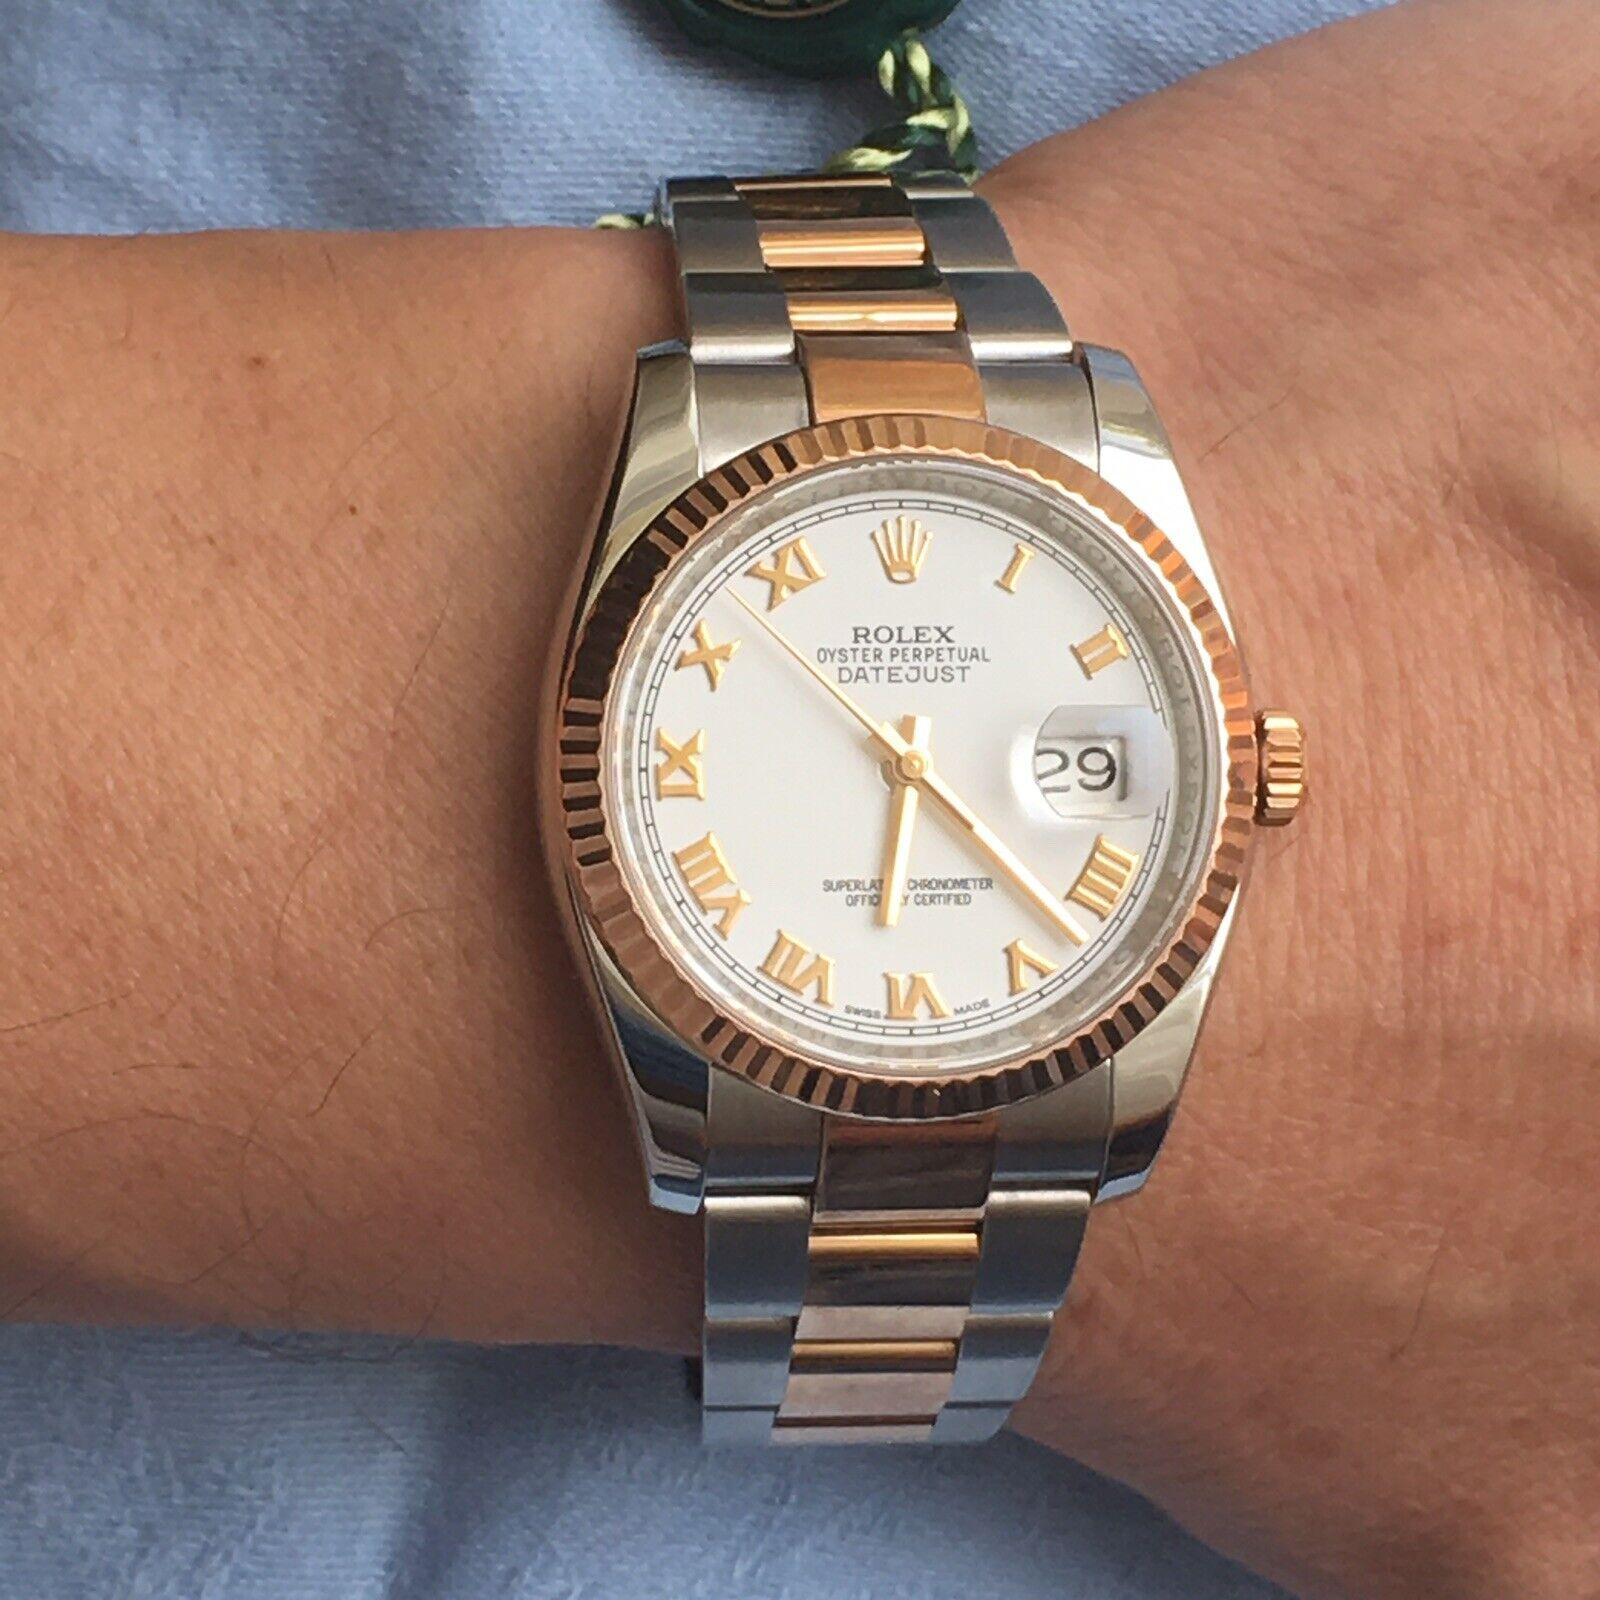 2015 Rolex Date-Just Rose Gold & Steel 

Serial Number 08AZ5581 
Model Number 116231
Code 72601
Dial White Roman Numerals
Bracelet 13 graduated links (12 complete + 1/2 link) all original and mint, 18 Karat Rose Gold and Stainless Steel  
Year Built